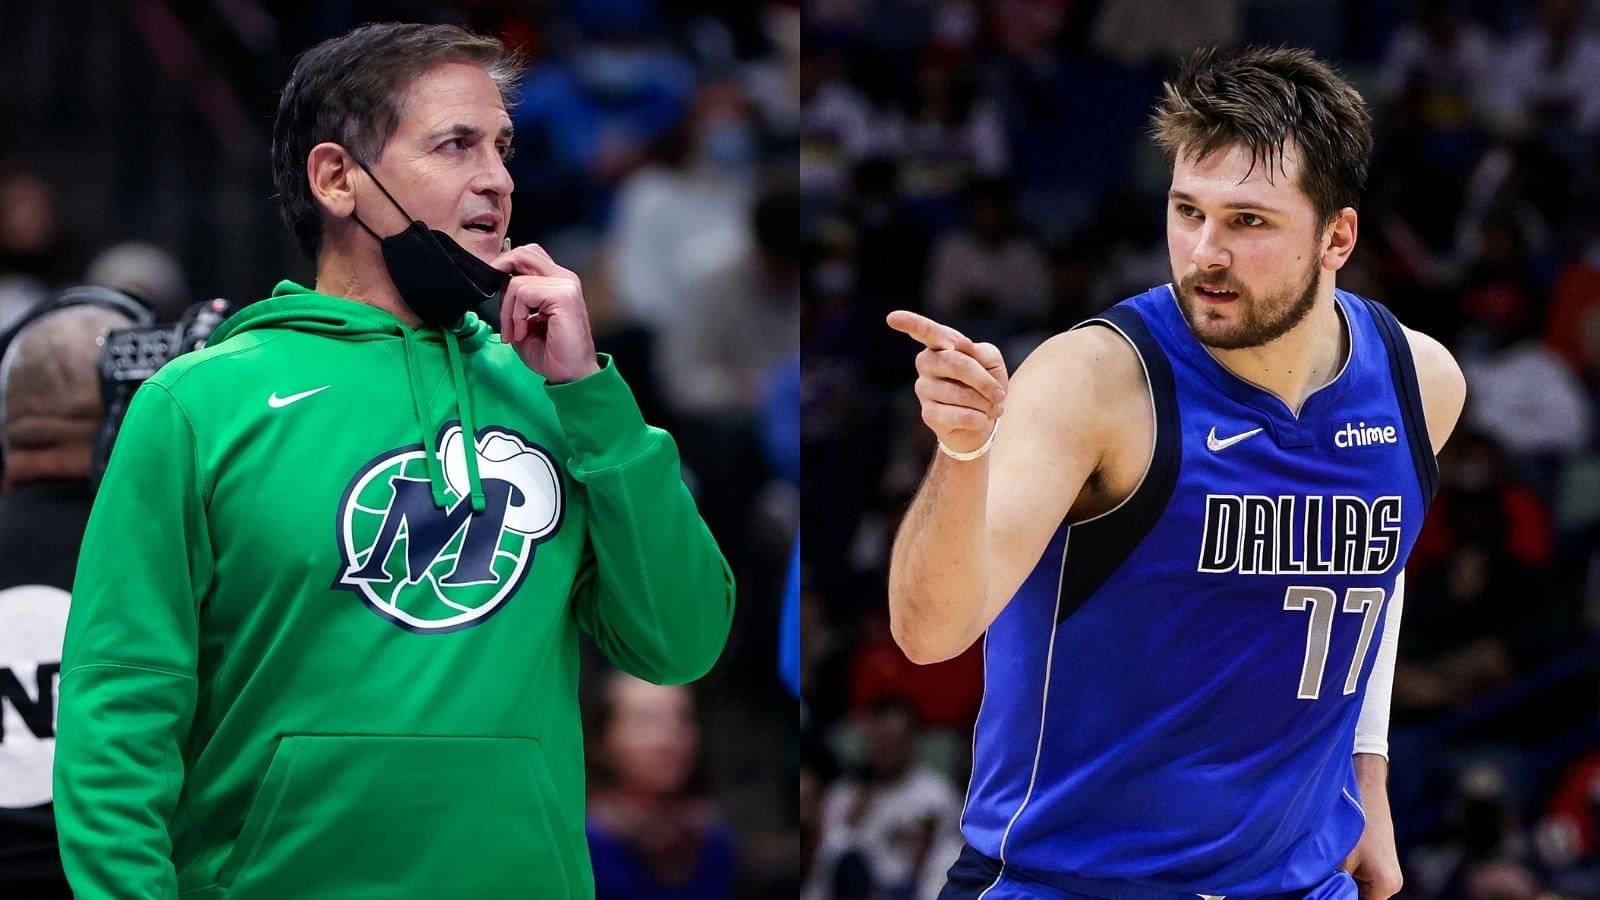 "If Luka Doncic is going to be the best, there are certain things he has to control": Mark Cuban knows the Slovenian superstar wants to be the best in the league, as the 3x All-Star takes care of his diet